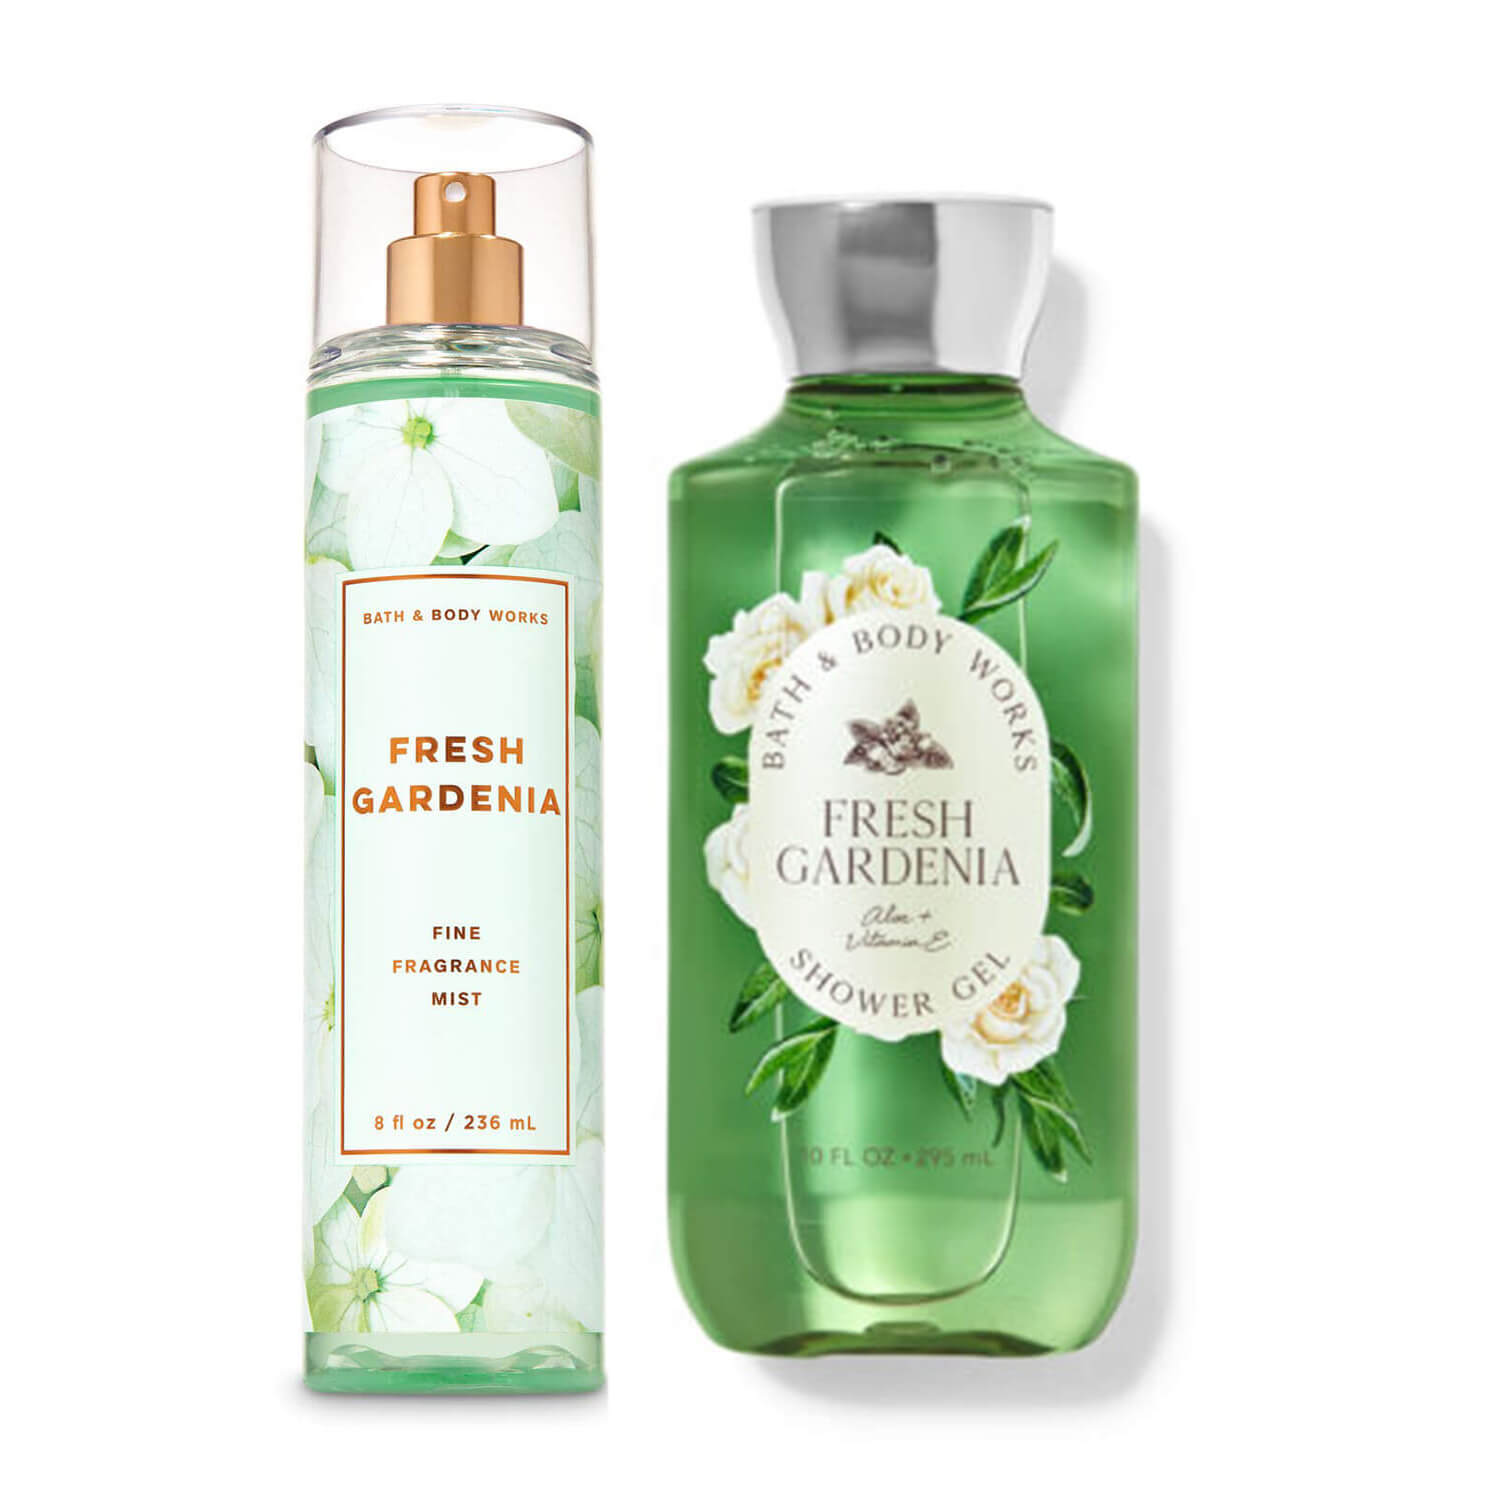 buy bath and body works cream mist and shower gel in fresh gardenia fragrance available at Heygirl.pk for delivery in Pakistan